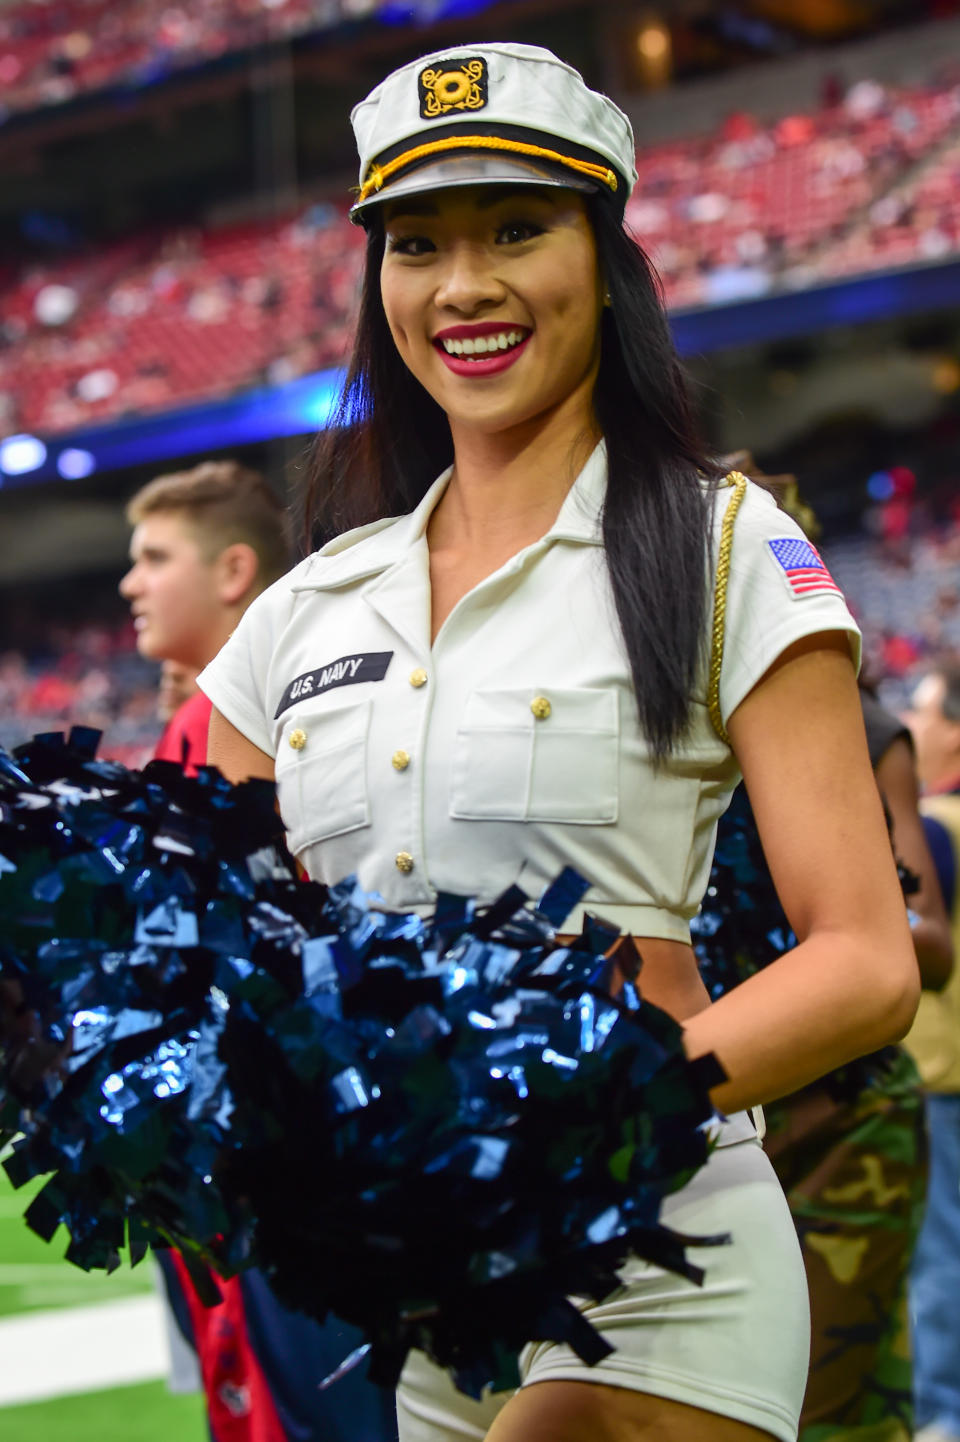 <p>The Houston Texans cheerleaders rev up the crowd in a salute to service during the football game between the Indianapolis Colts and the Houston Texans on November 5, 2017 at NRG Stadium in Houston, Texas. (Photo by Ken Murray/Icon Sportswire) </p>